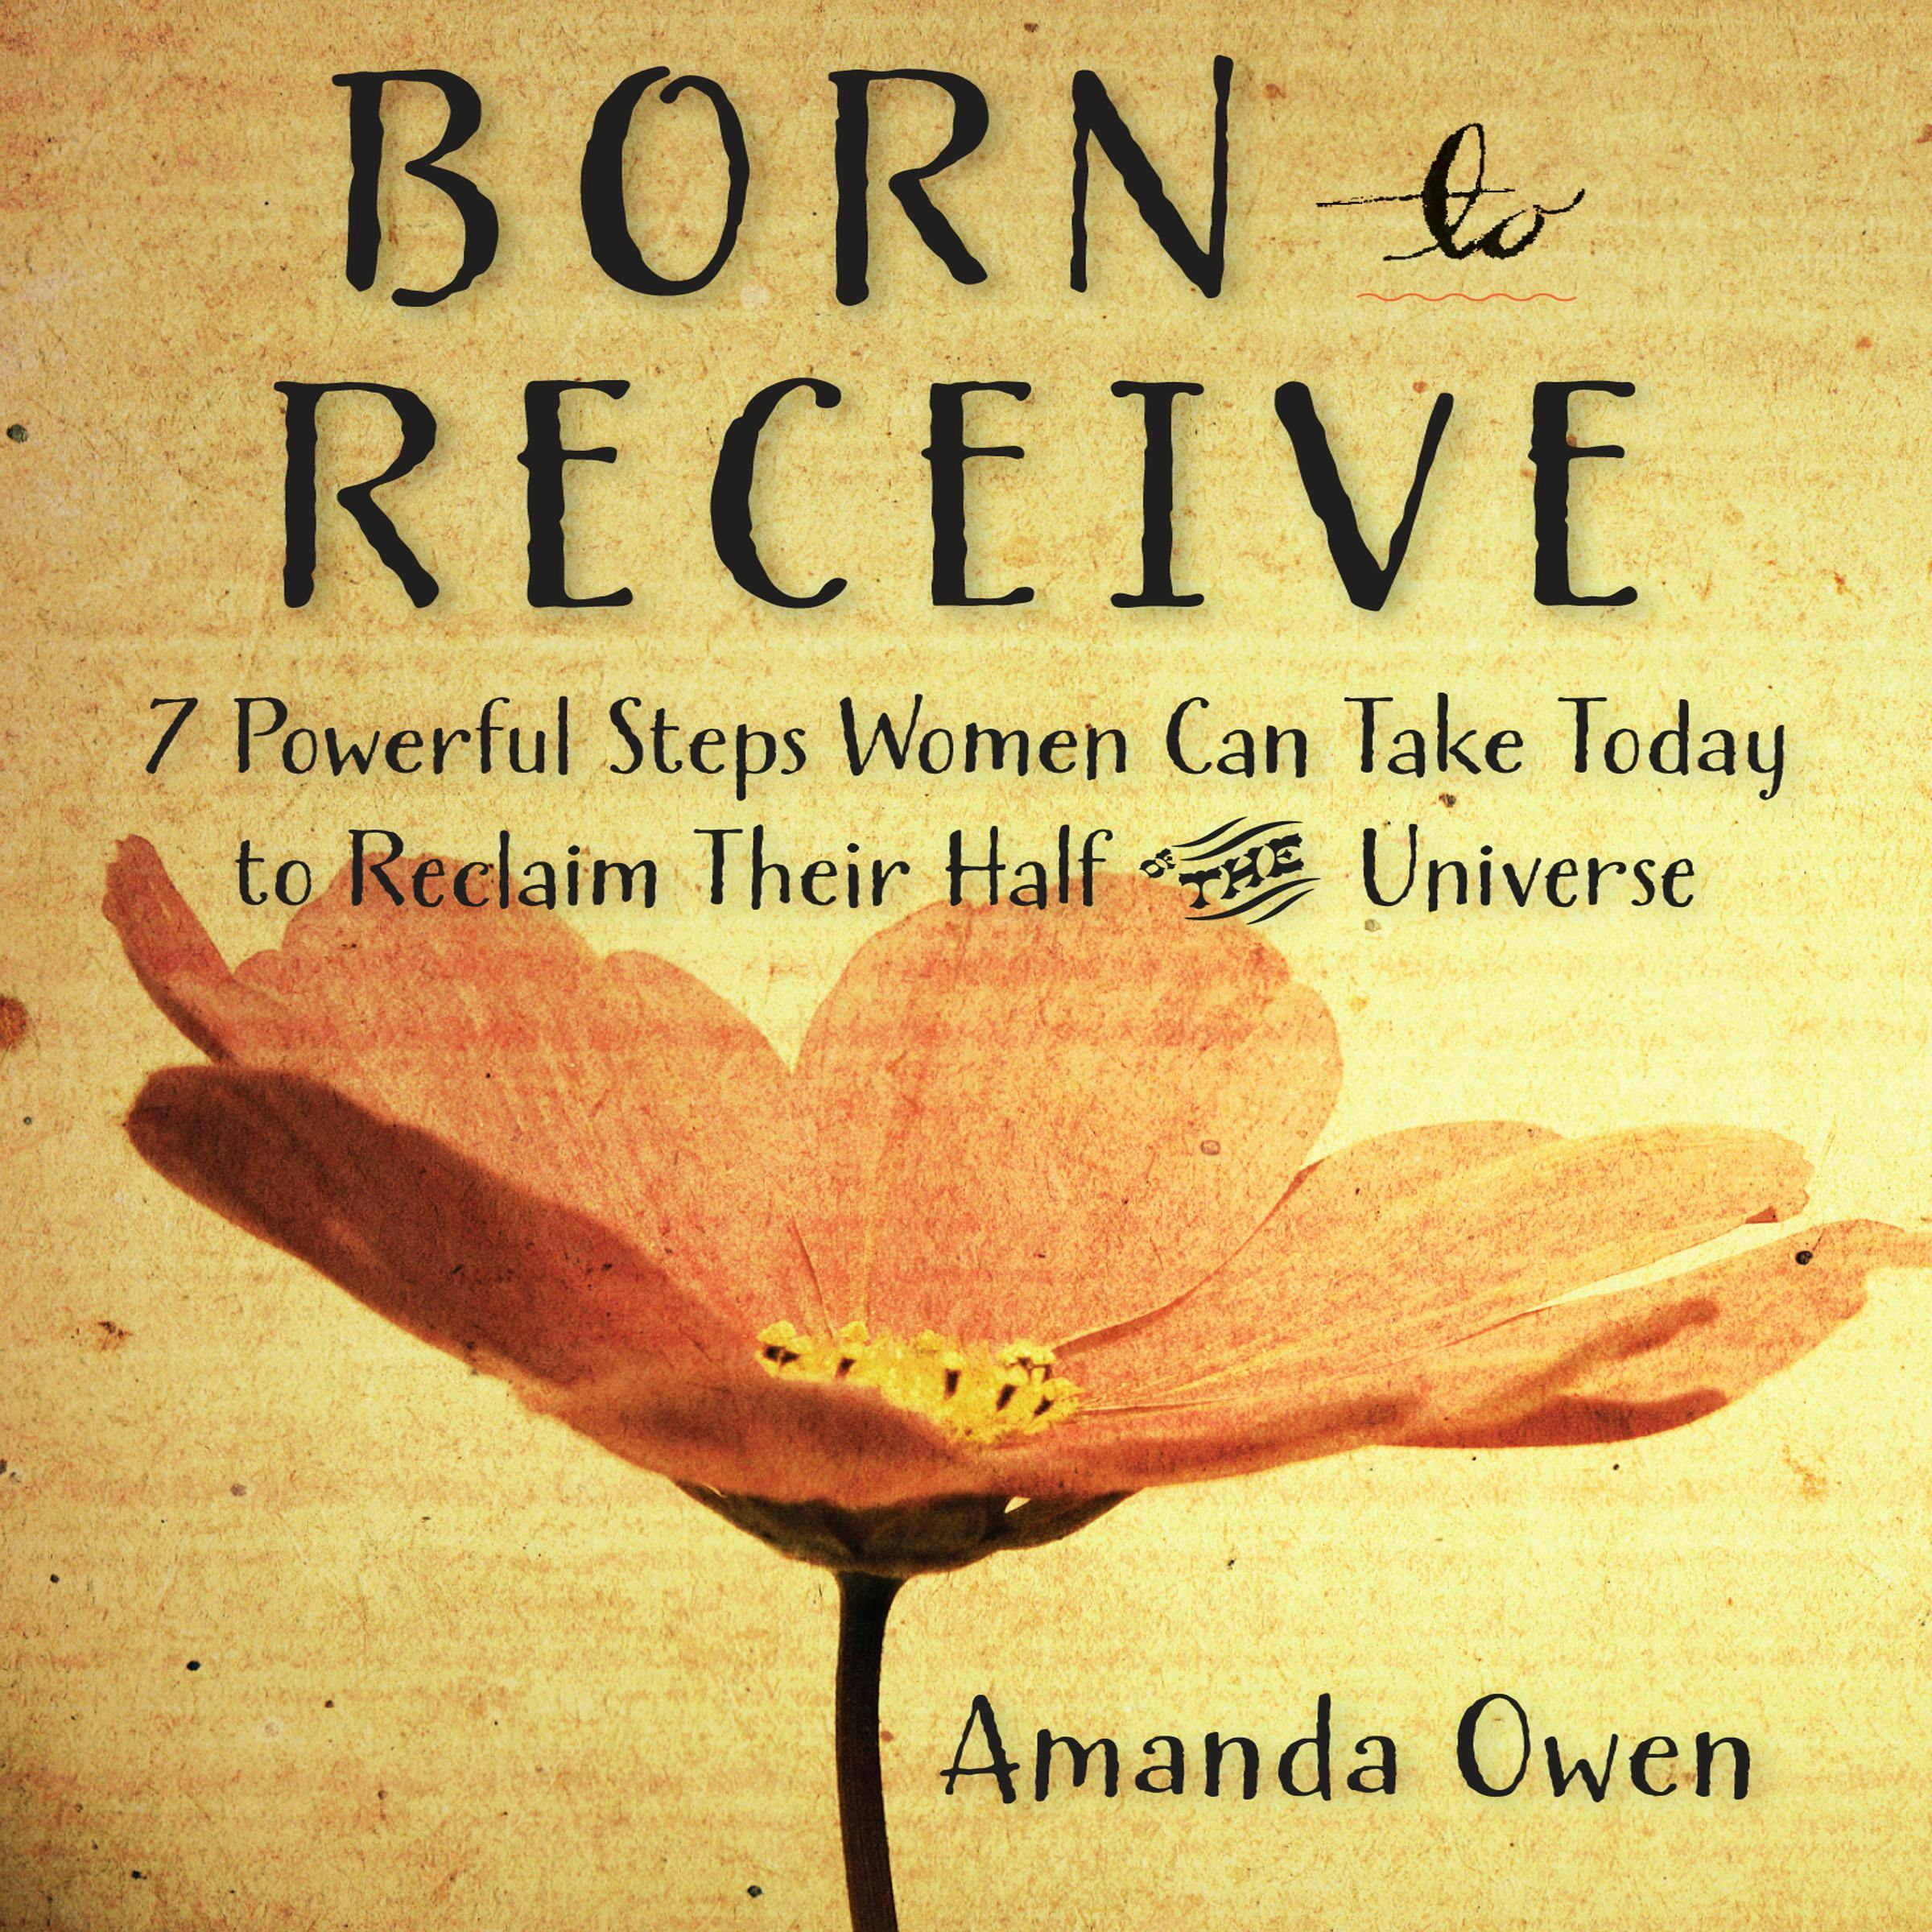 Born to Receive: Seven Powerful Steps Women Can Take Today to Reclaim Their Half of the Universe - Amanda Owen